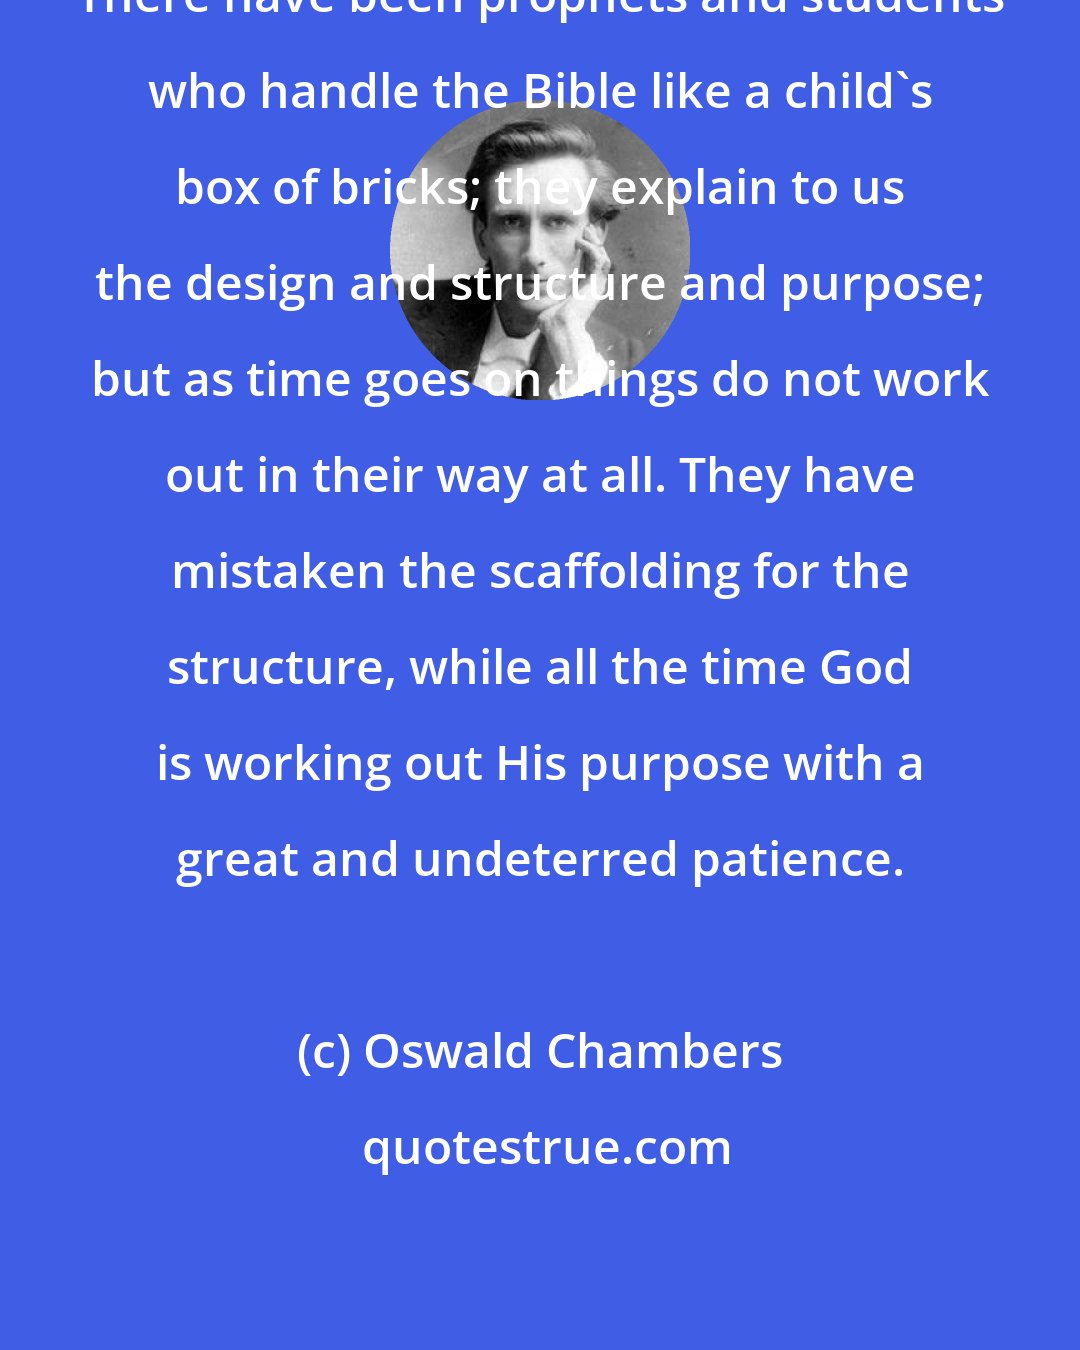 Oswald Chambers: There have been prophets and students who handle the Bible like a child's box of bricks; they explain to us the design and structure and purpose; but as time goes on things do not work out in their way at all. They have mistaken the scaffolding for the structure, while all the time God is working out His purpose with a great and undeterred patience.